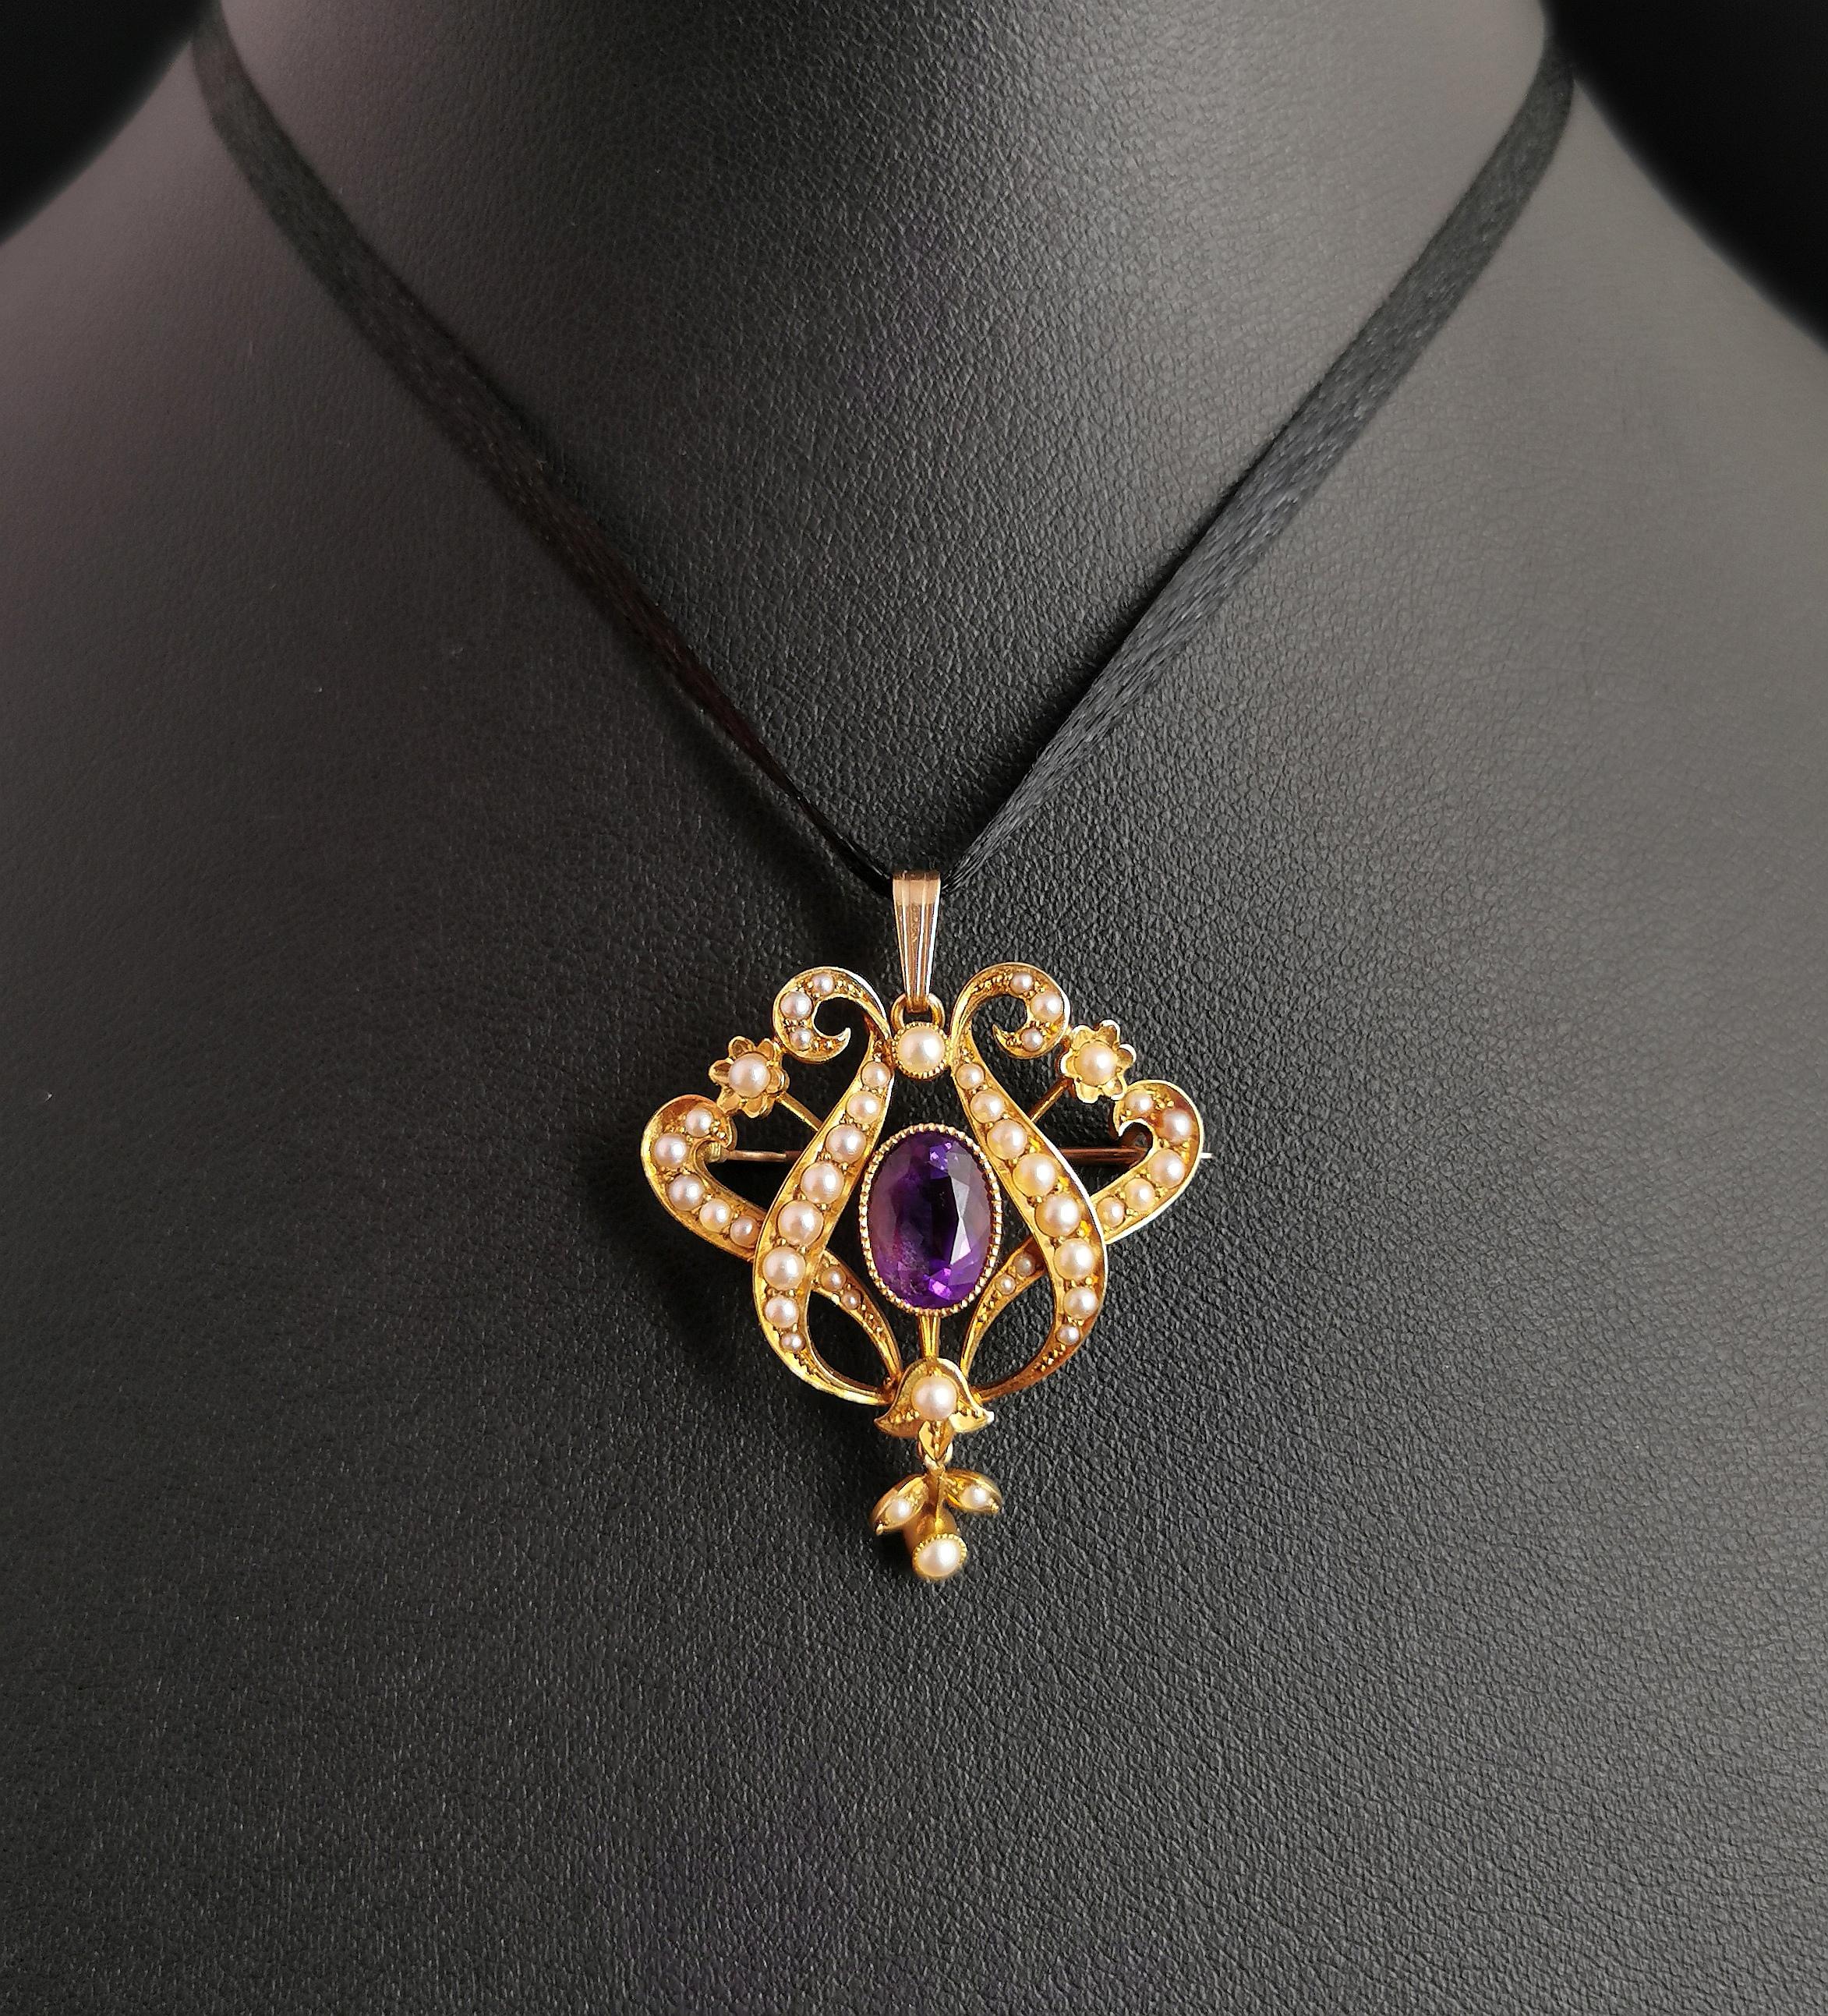 Antique Art Nouveau Amethyst and Pearl Pendant Brooch, 15kt Yellow Gold 1